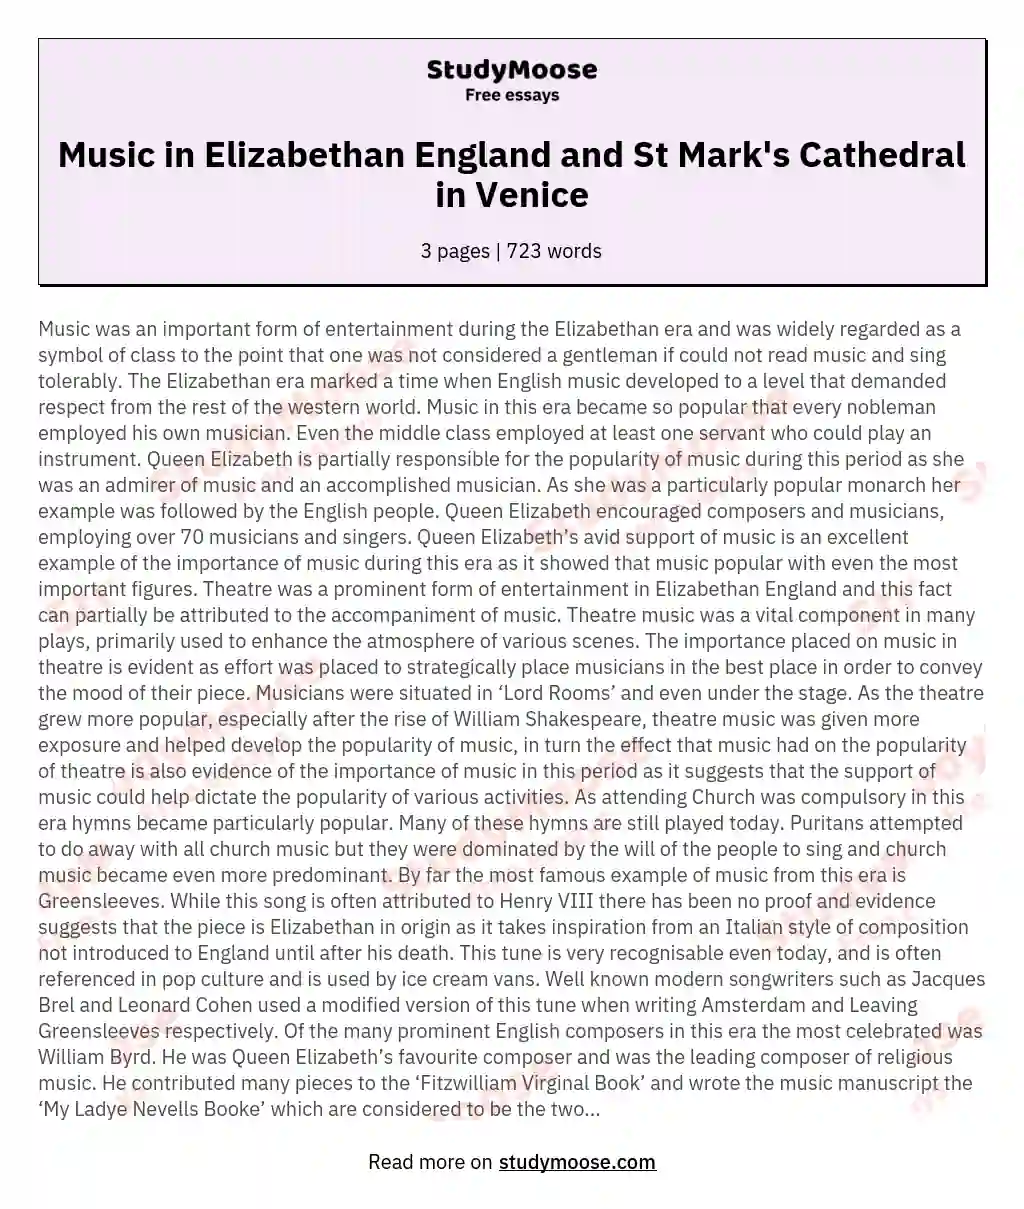 Music in Elizabethan England and St Mark's Cathedral in Venice essay